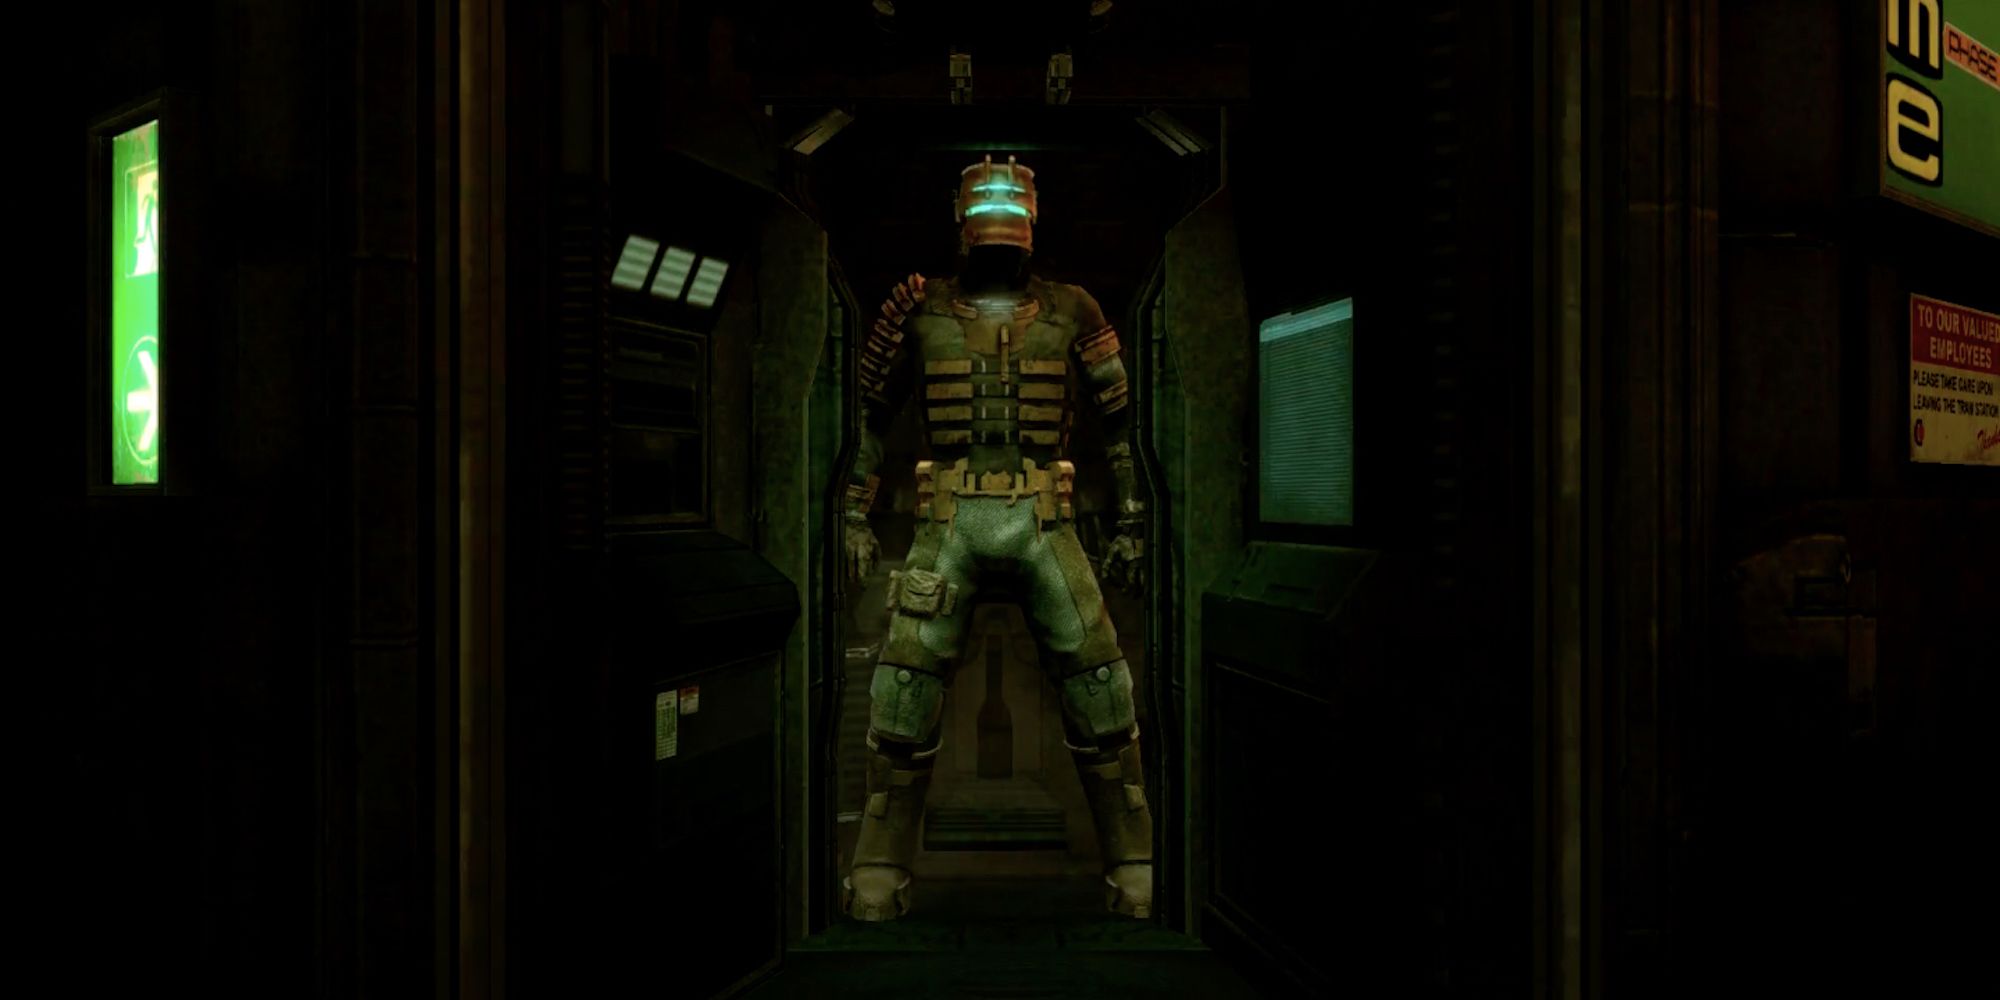 Dead space second suit standard miner rig